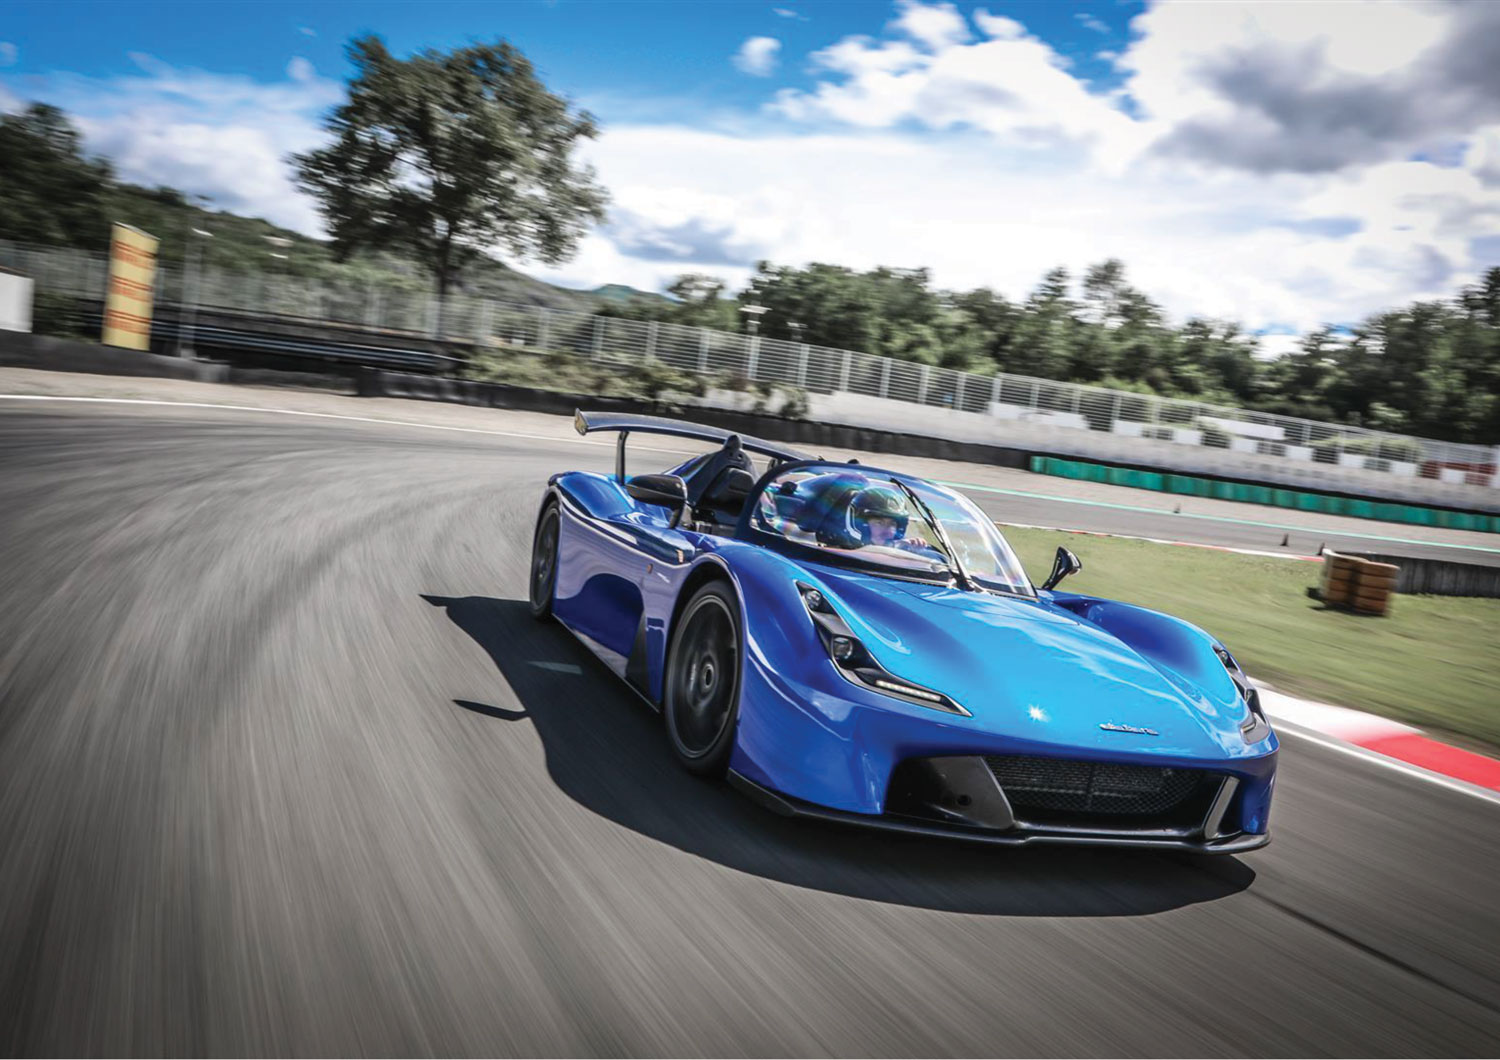 Dallara Stradale Is An Italian Supercar With A Ford 2.3L EcoBoost For A Heart